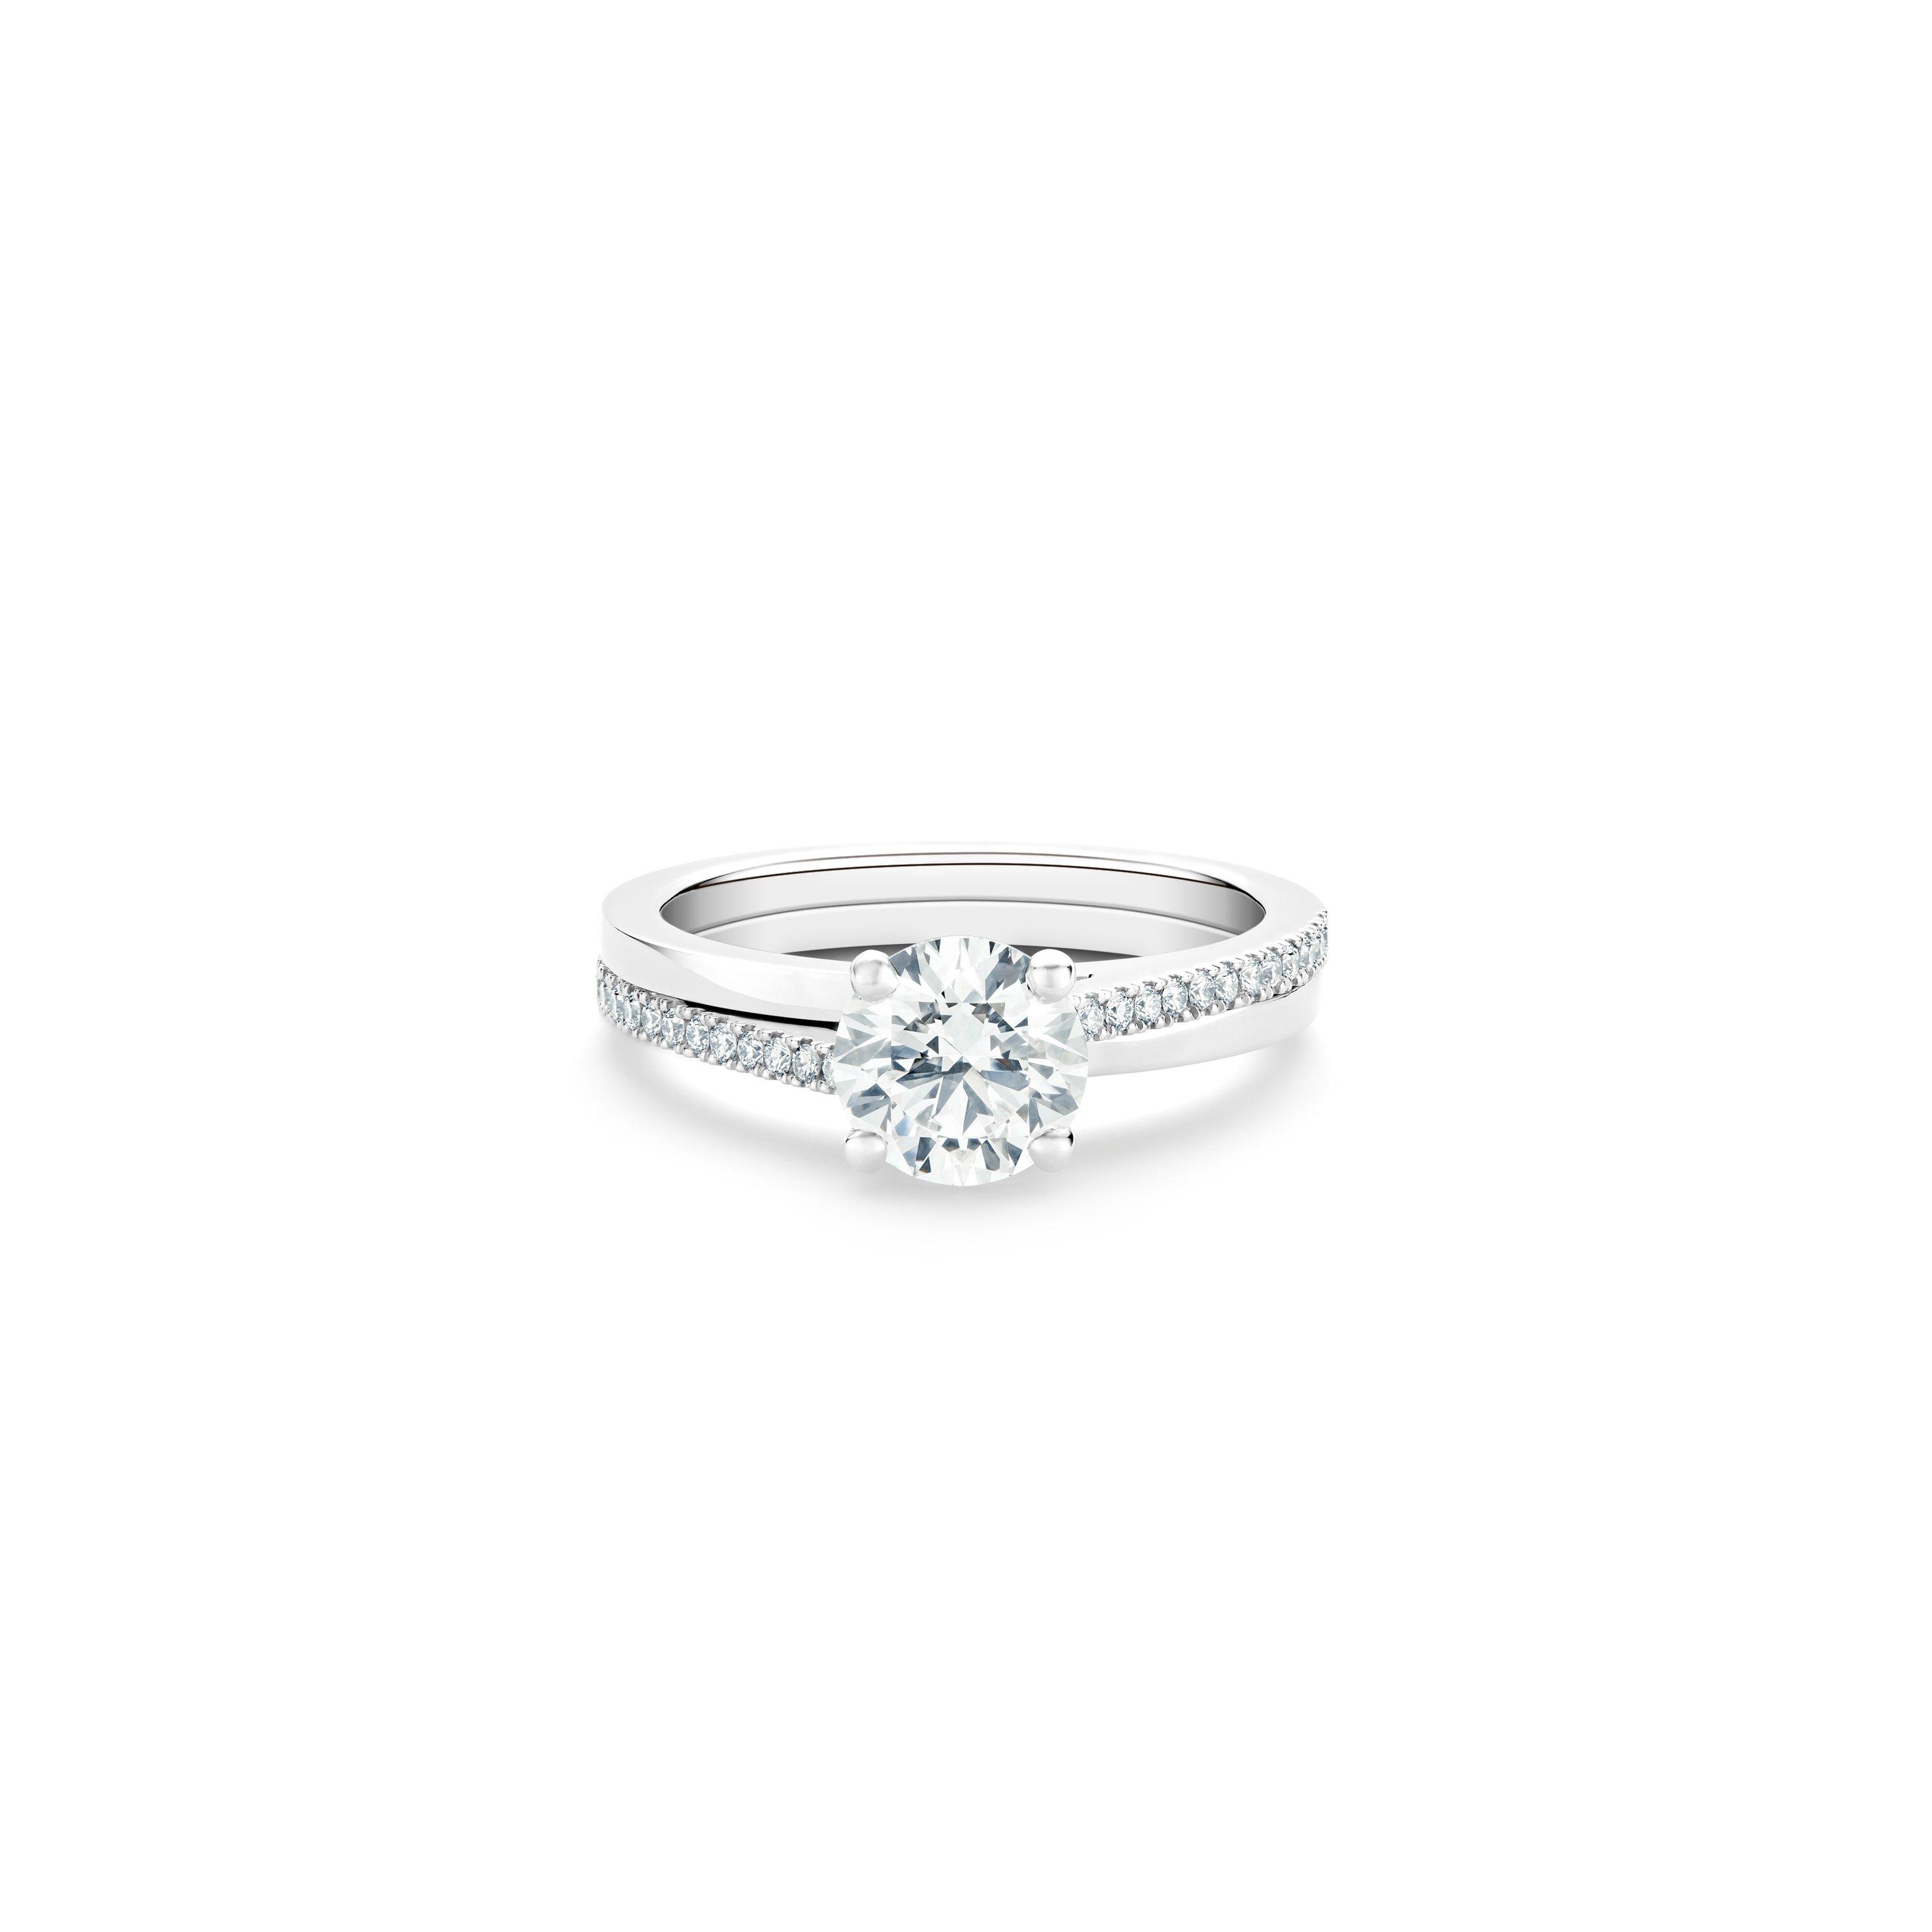 De Beers Diamonds & Engagement Rings: Are they expensive?